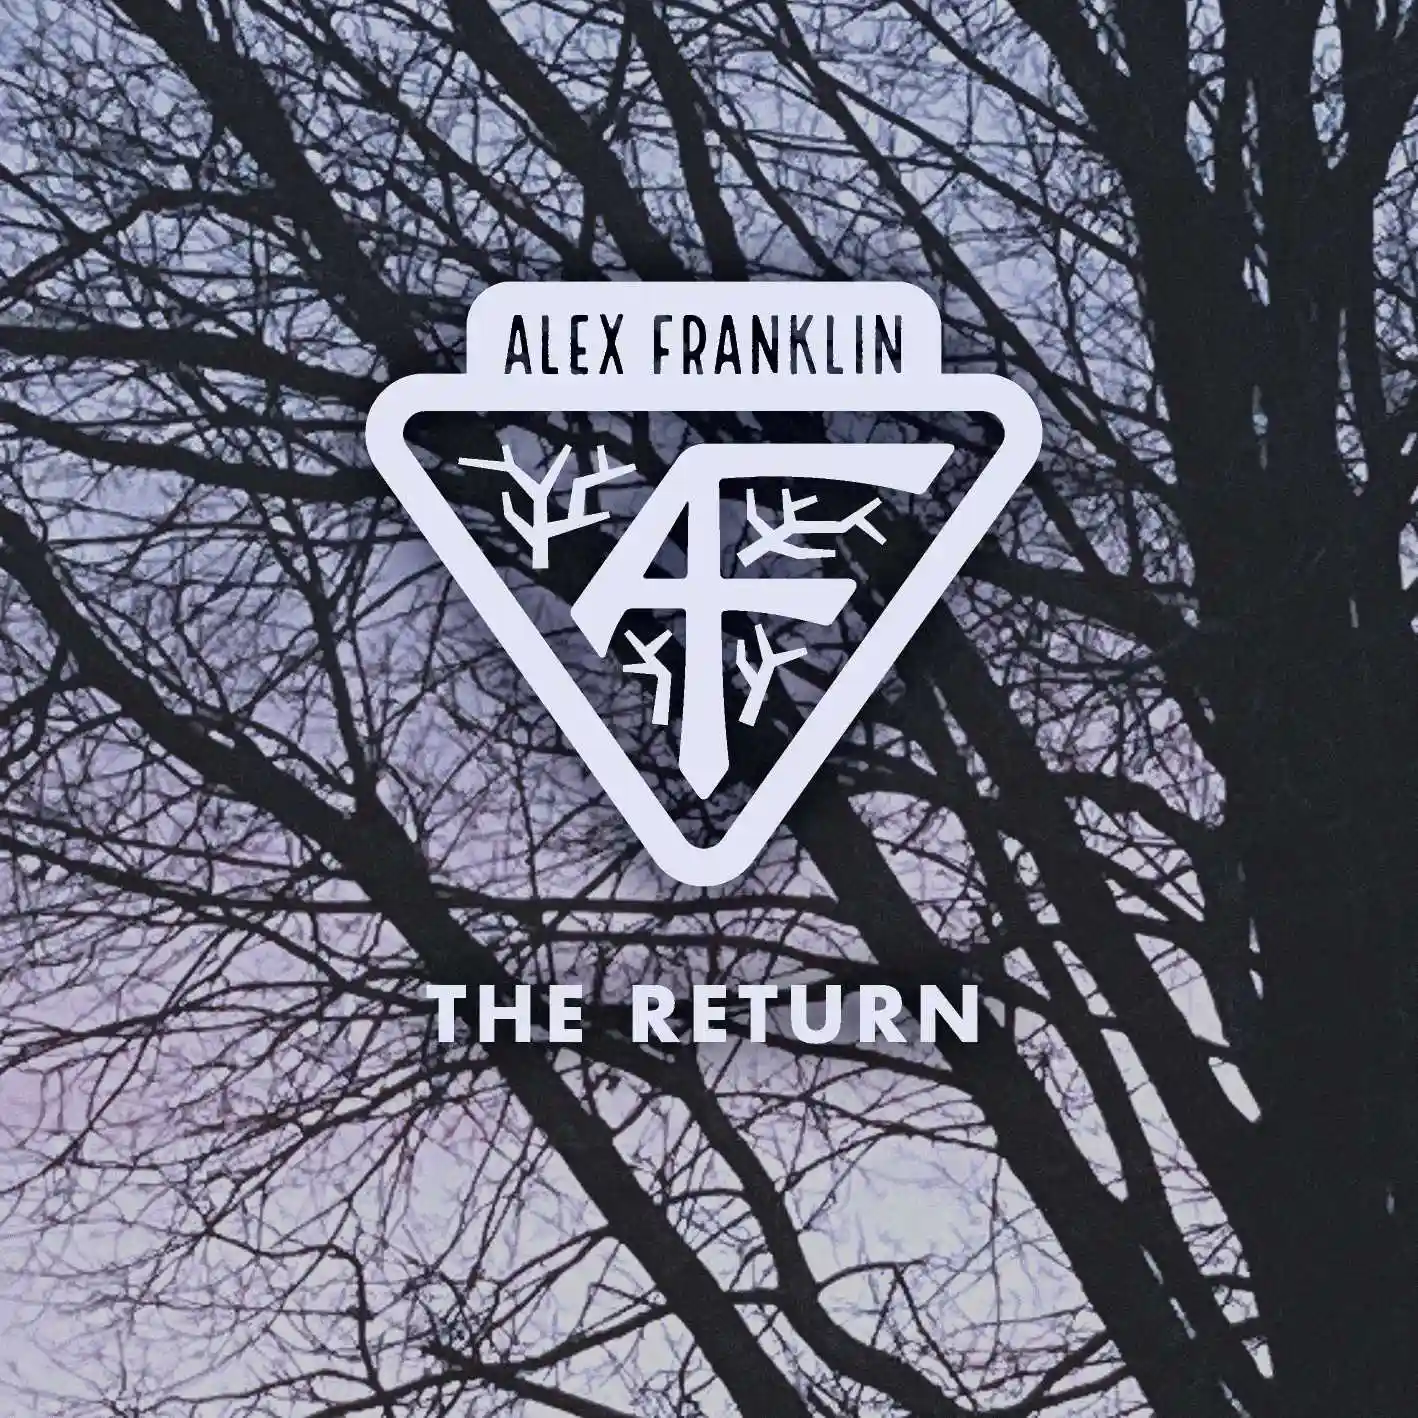 Album cover for “The Return” by Alex Franklin